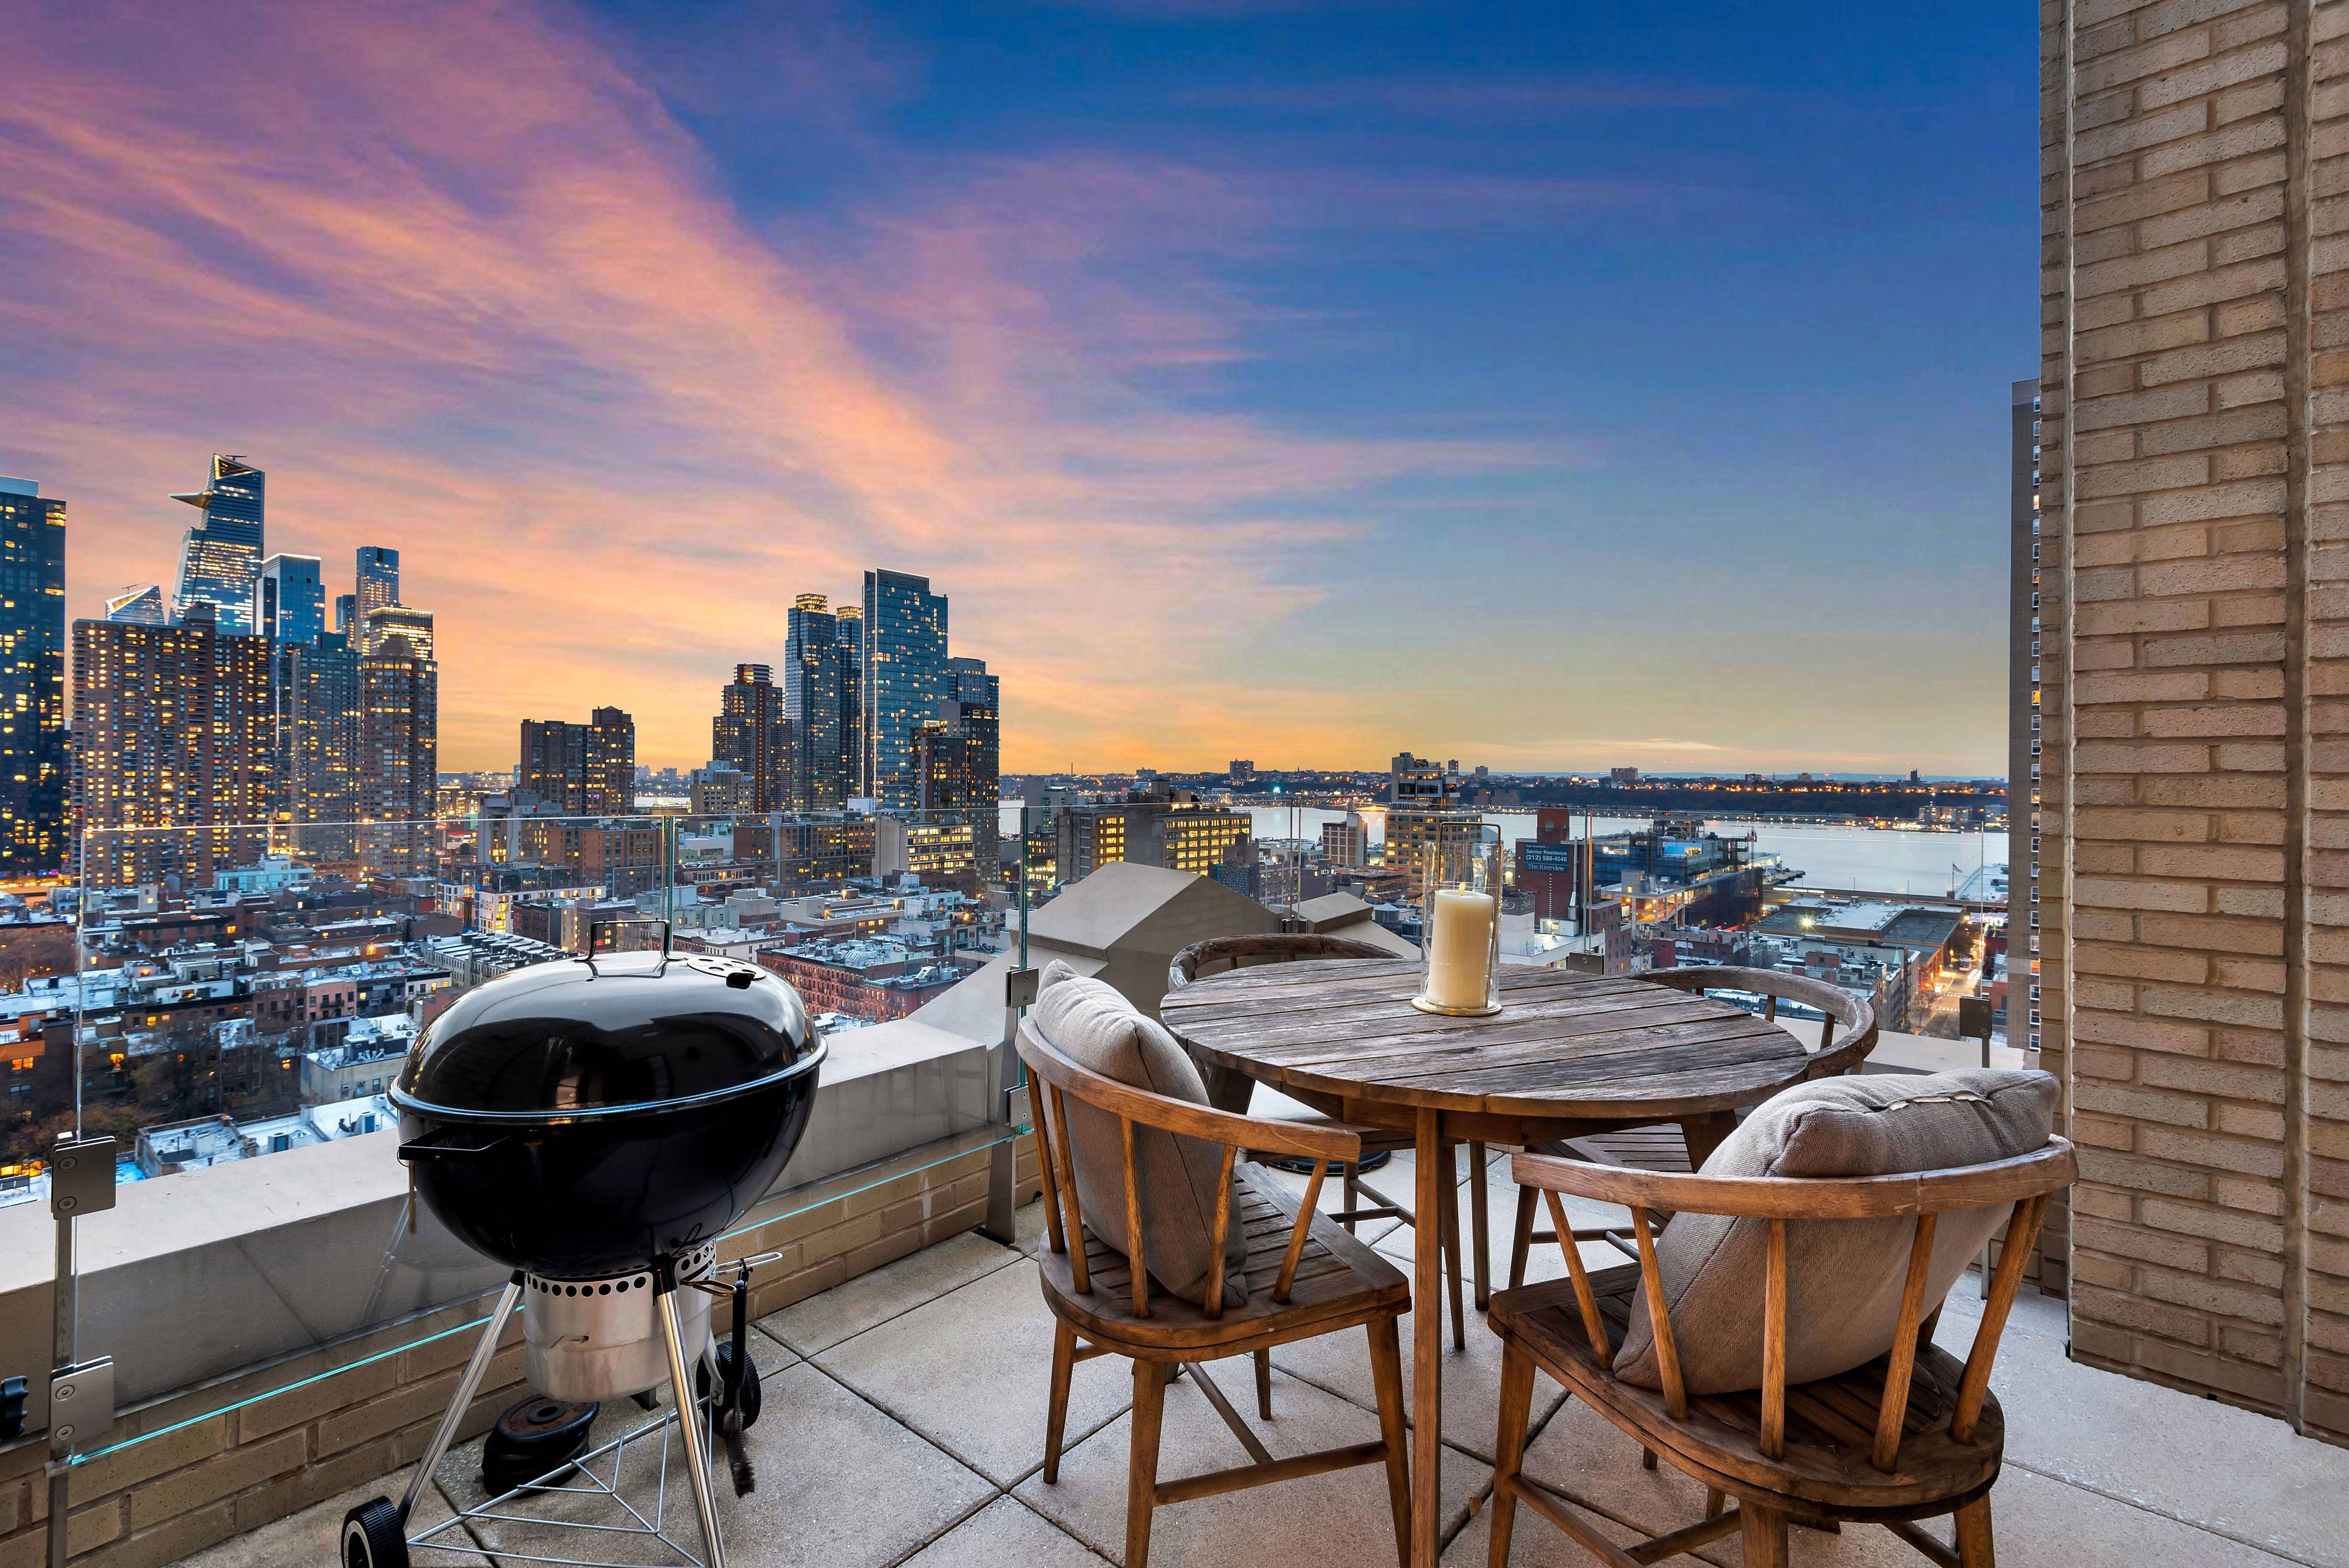 Stella Tower luxurious 1 bedroom with an amazing 88 square foot private terrace.